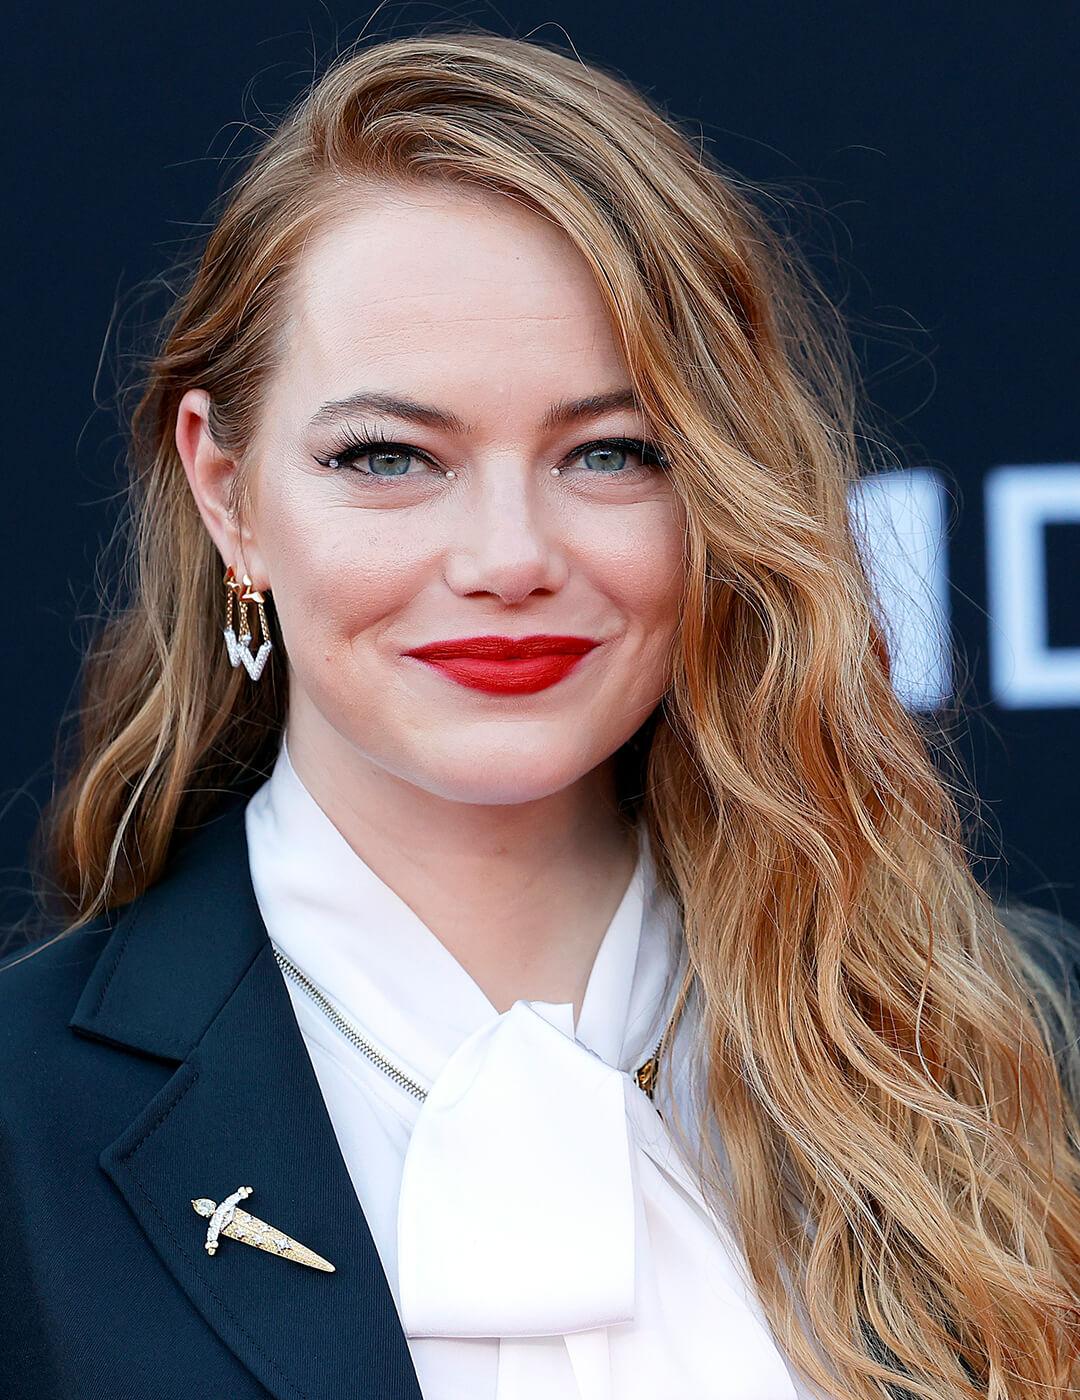 A photo of Emma Stone with strawberry golden hair with pearl beads on her eyelids and wearing a bold red lipstick